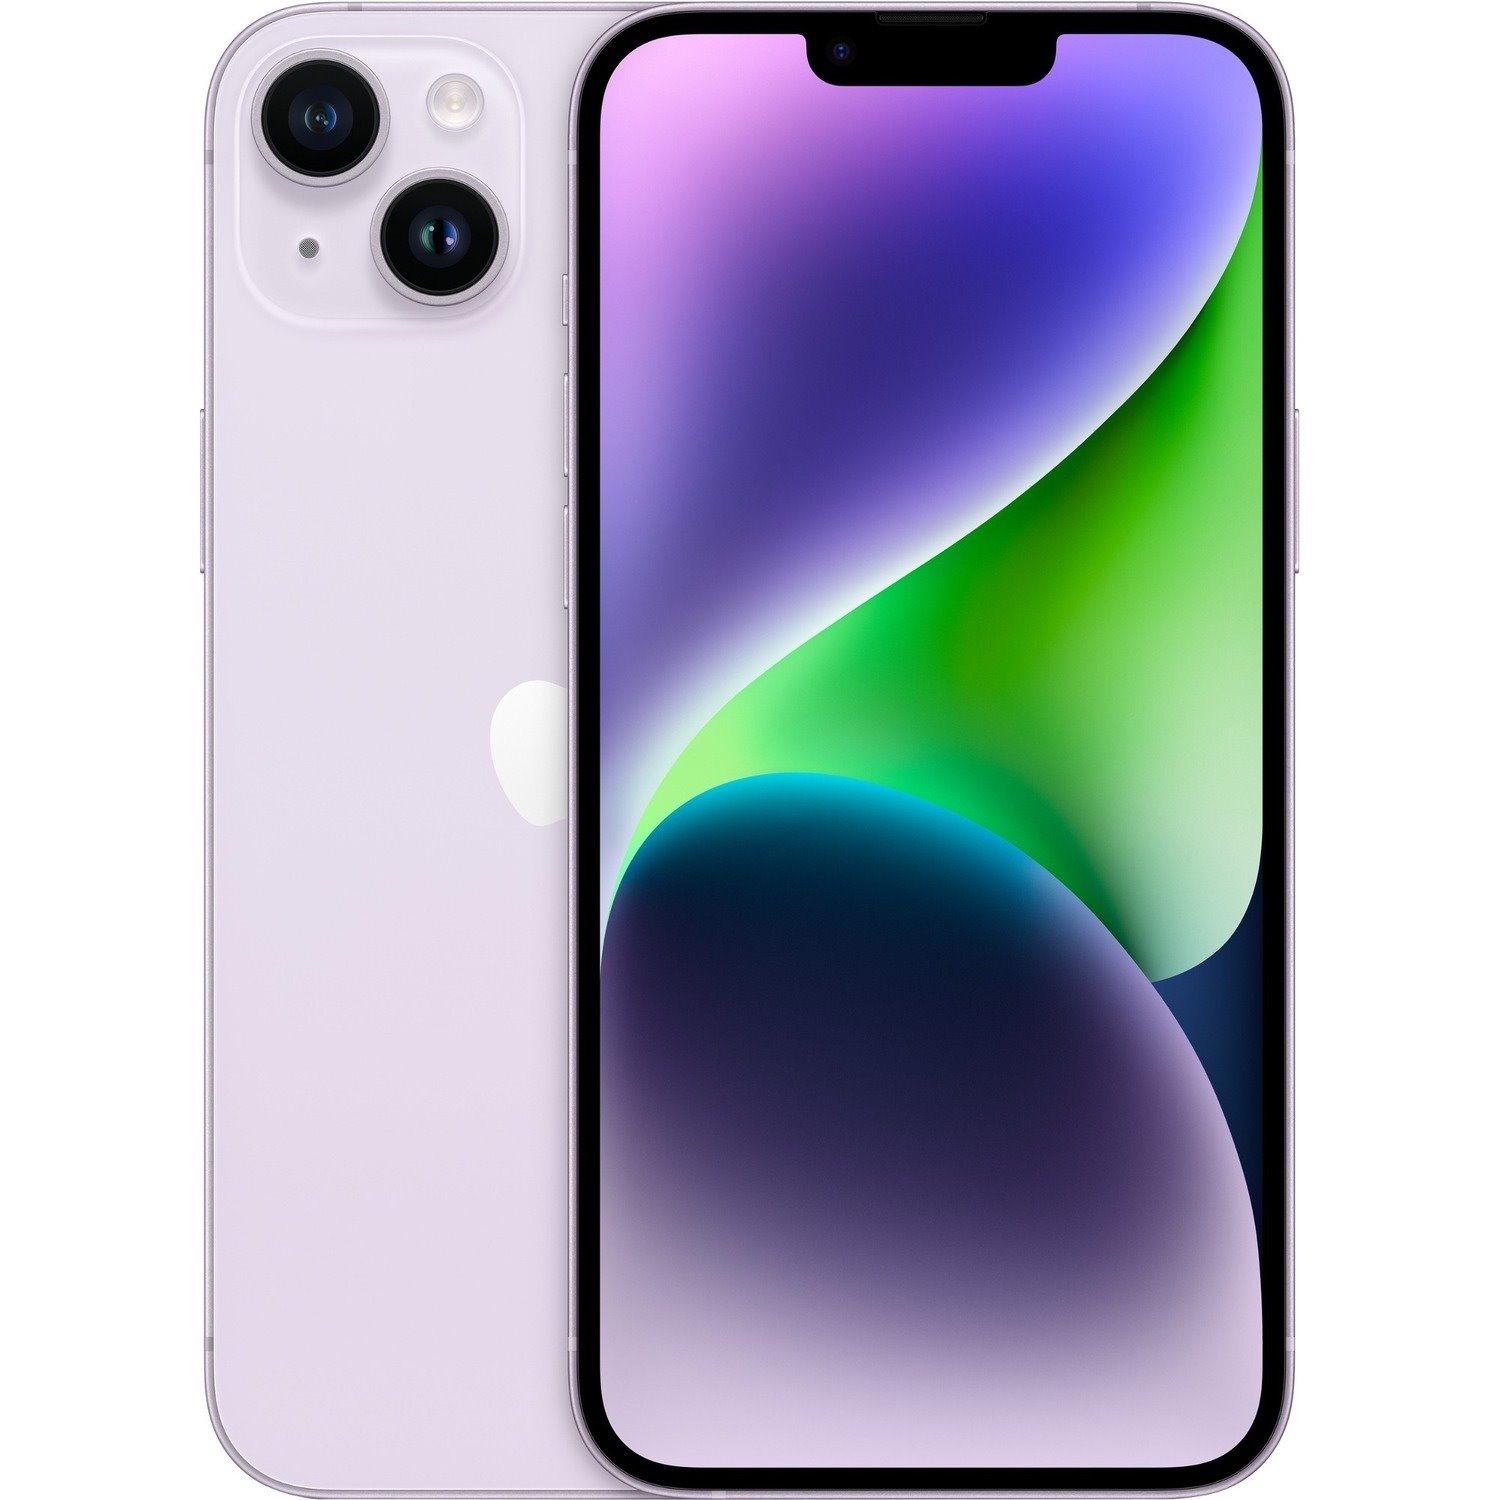 Apple iPhone 14 A2882 128 GB Smartphone - 6.1" OLED 2532 x 1170 - Hexa-core (AvalancheDual-core (2 Core) 3.23 GHz + Blizzard Quad-core (4 Core) 1.82 GHz - 6 GB RAM - iOS 16 - 5G - Purple